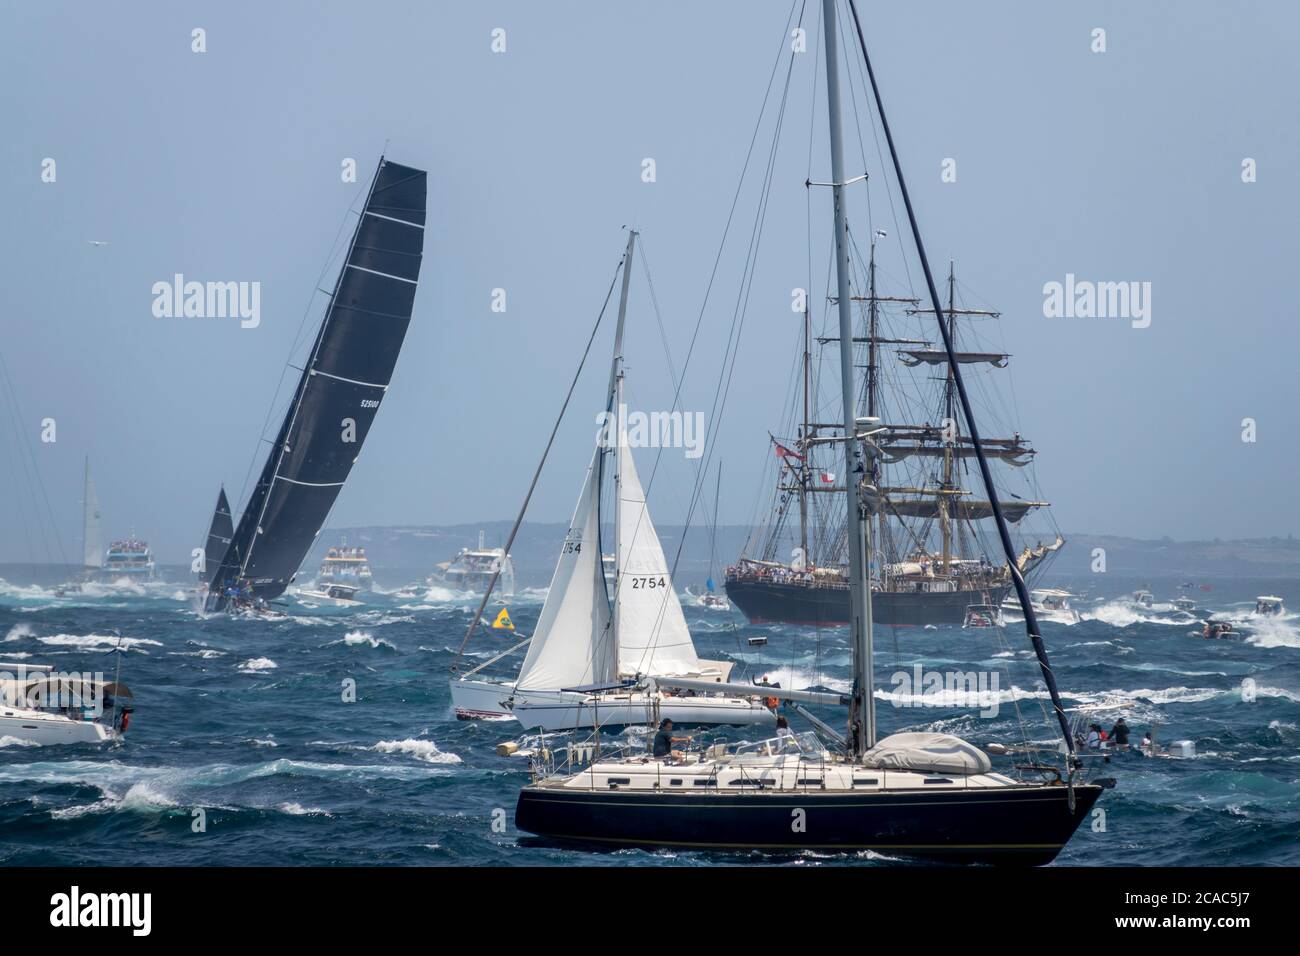 The organised chaos of the 2019 Sydney to Hobart yacht race start passing Sydney Heads, with maxi yacht Black Jack passing the Tall Ship 'James Craig' Stock Photo